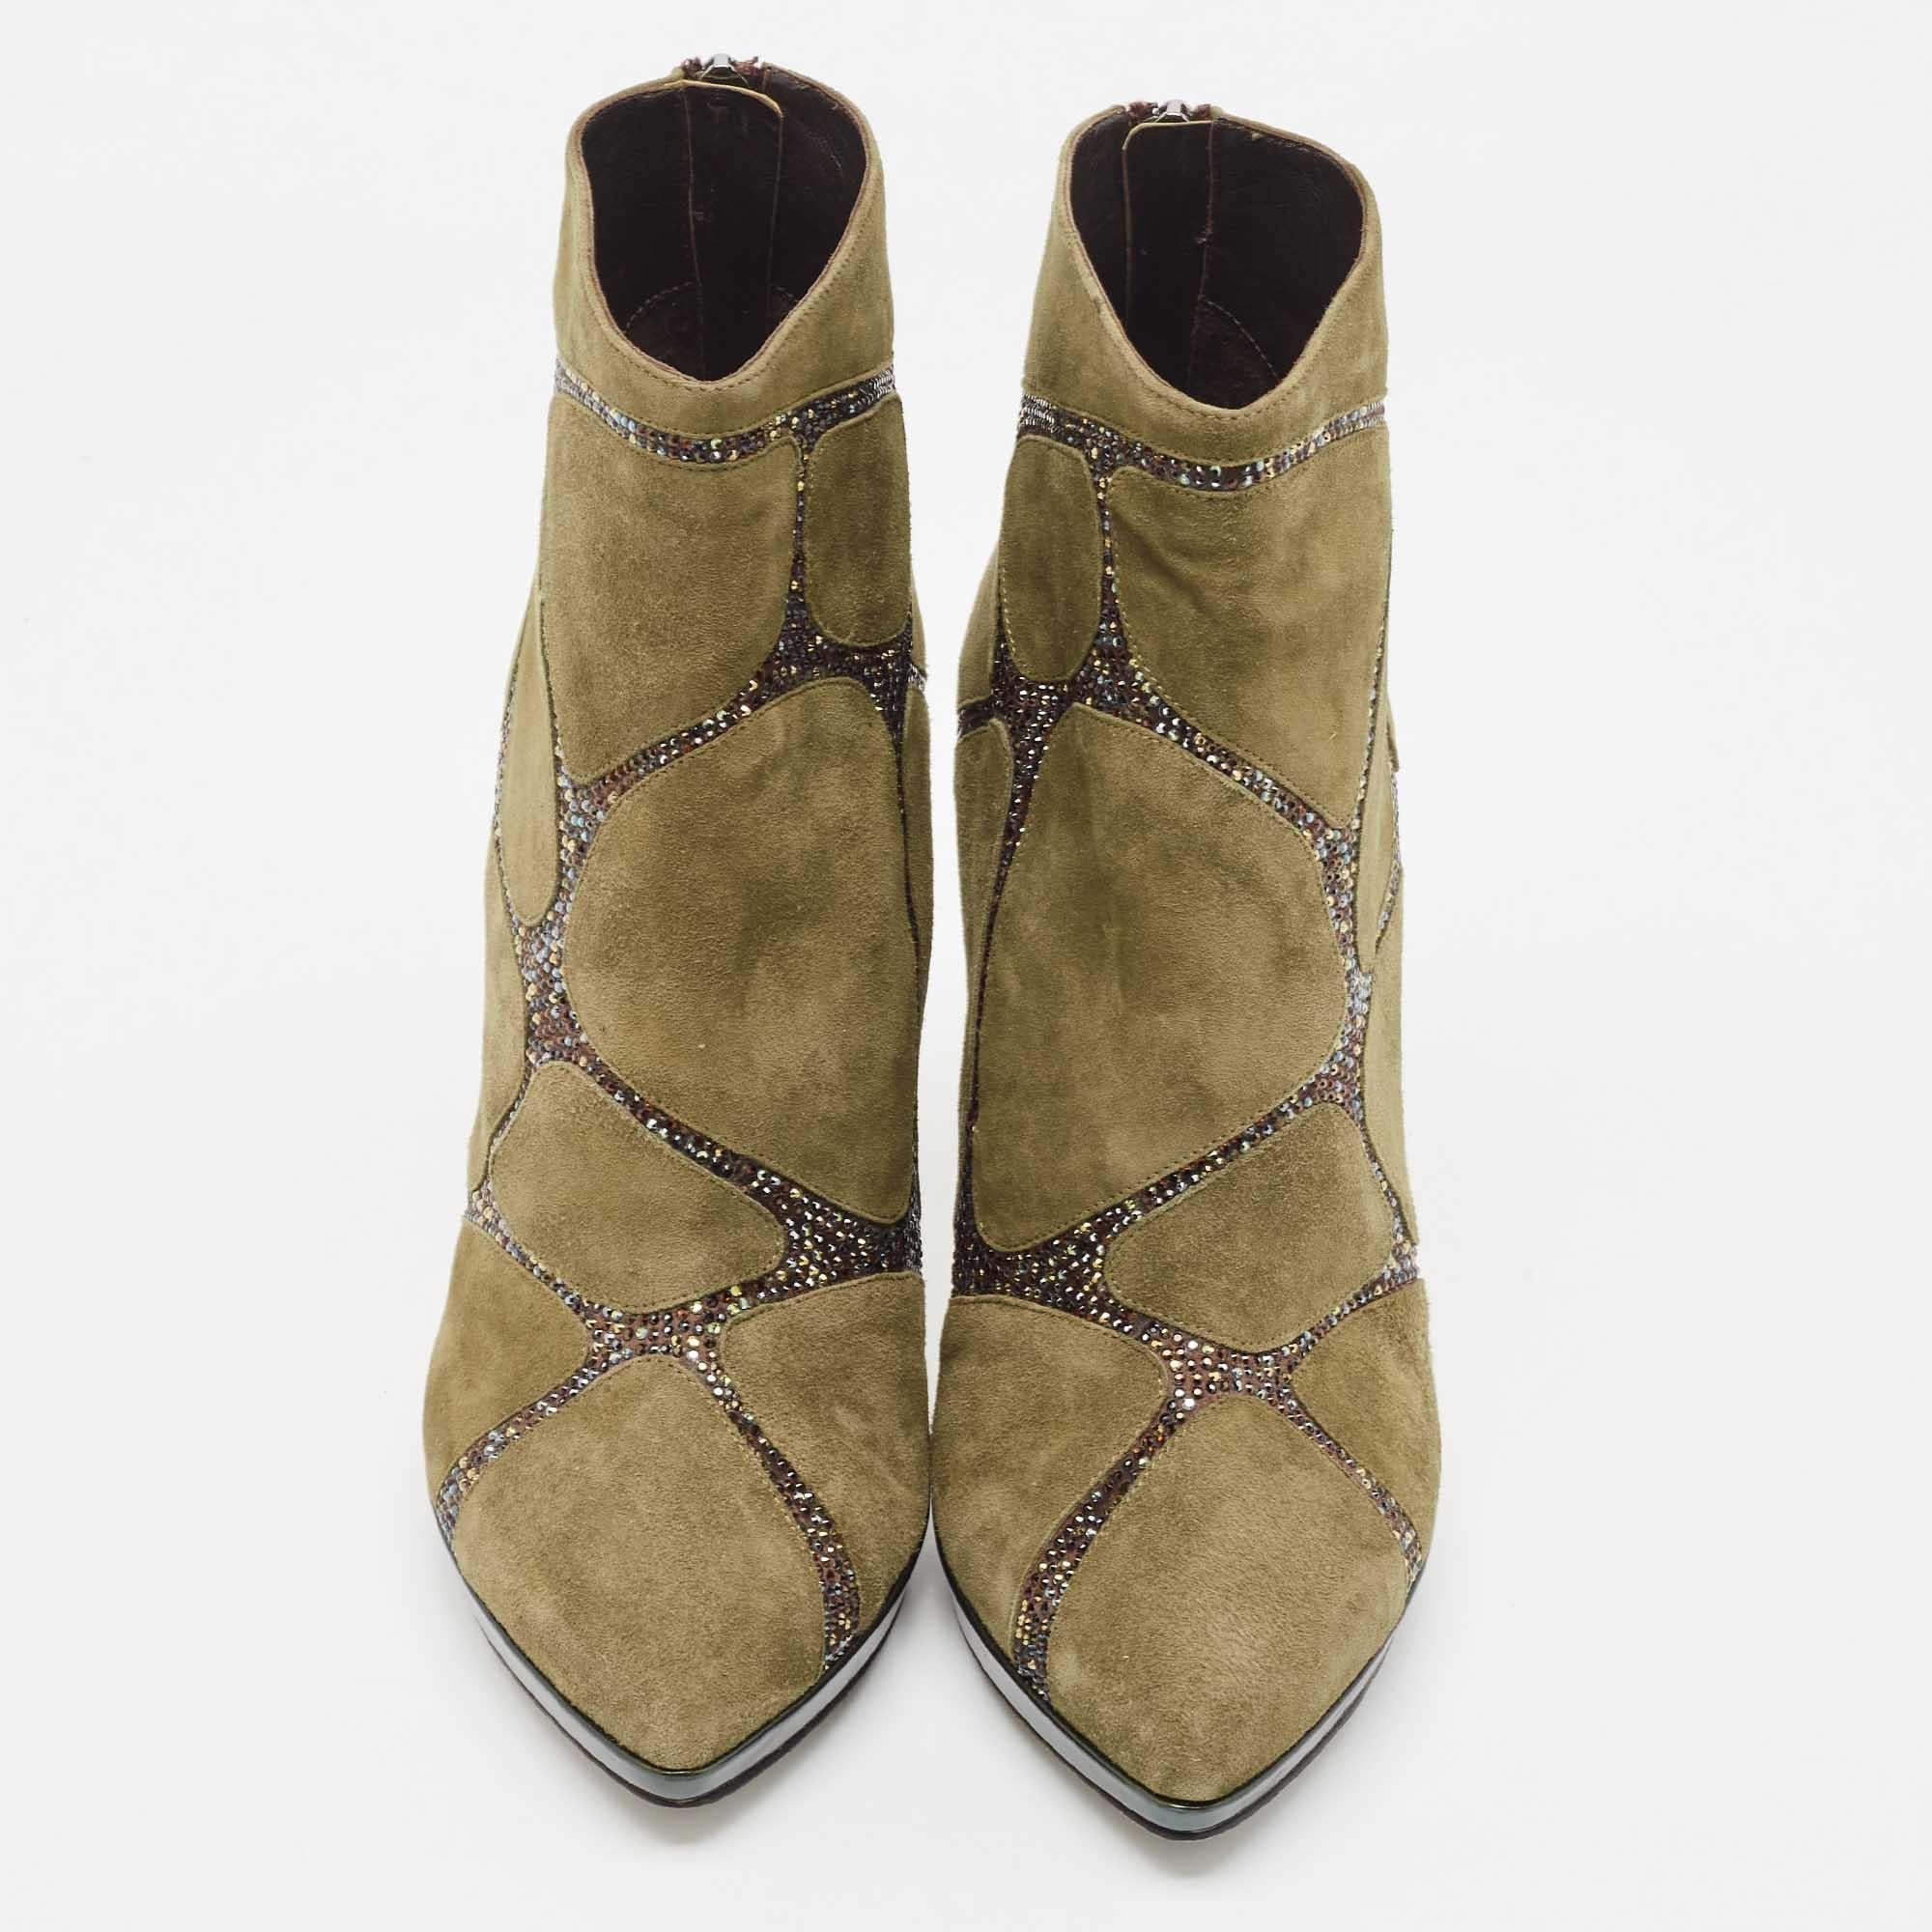 Boots are an essential part of your wardrobe, and these boots, crafted from top-quality materials, are a fine choice. Offering the best of comfort and style, this sturdy-soled pair would be great with a dress for a casual day out!

Includes: